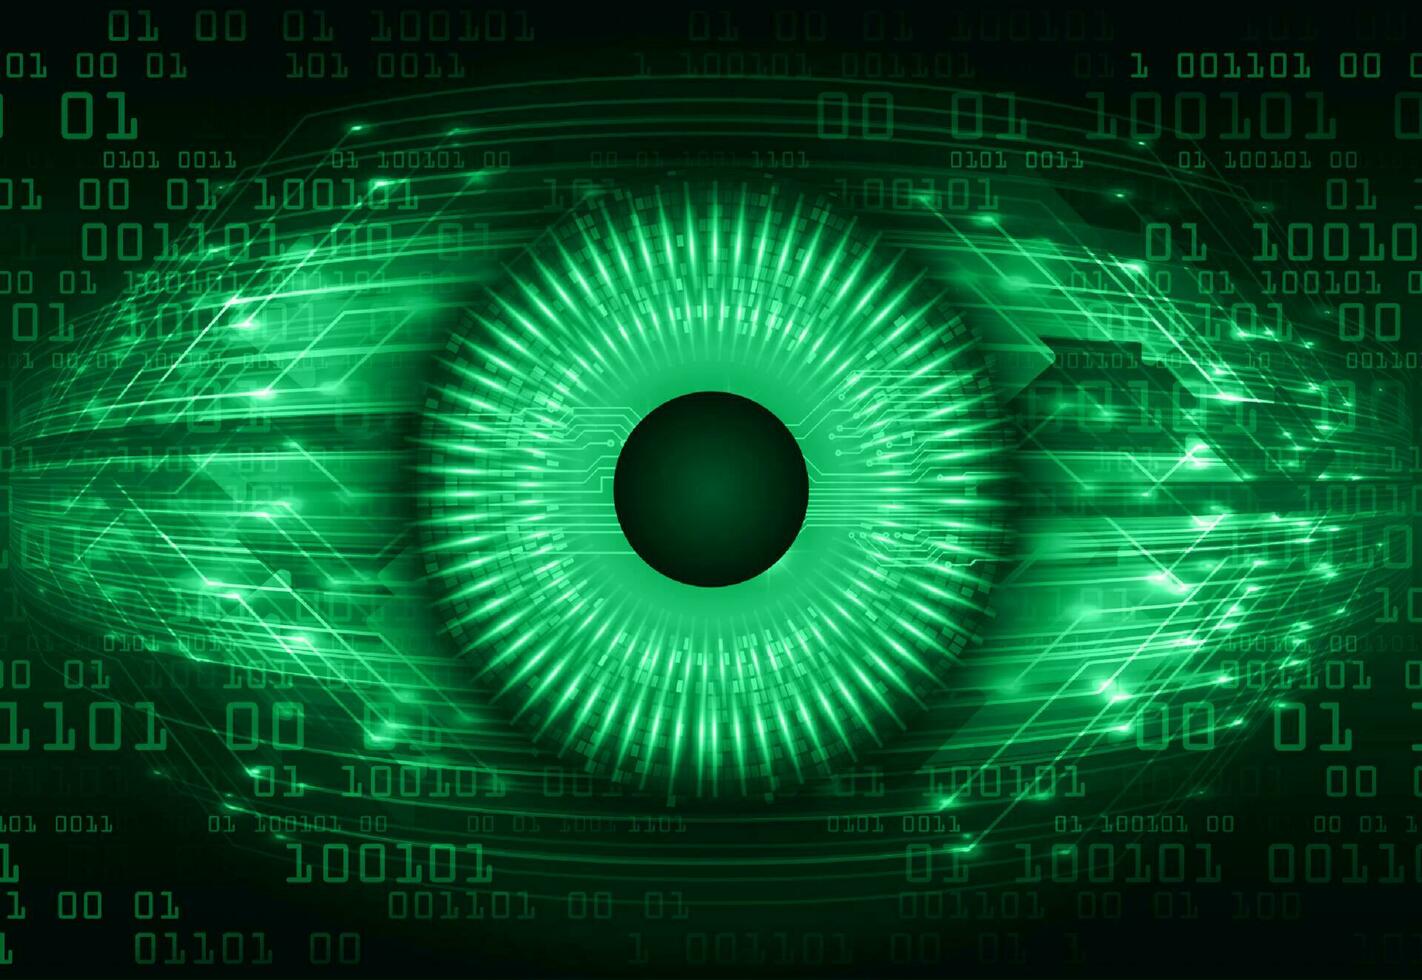 Modern Cybersecurity Technology Icon Pack with Eyes vector